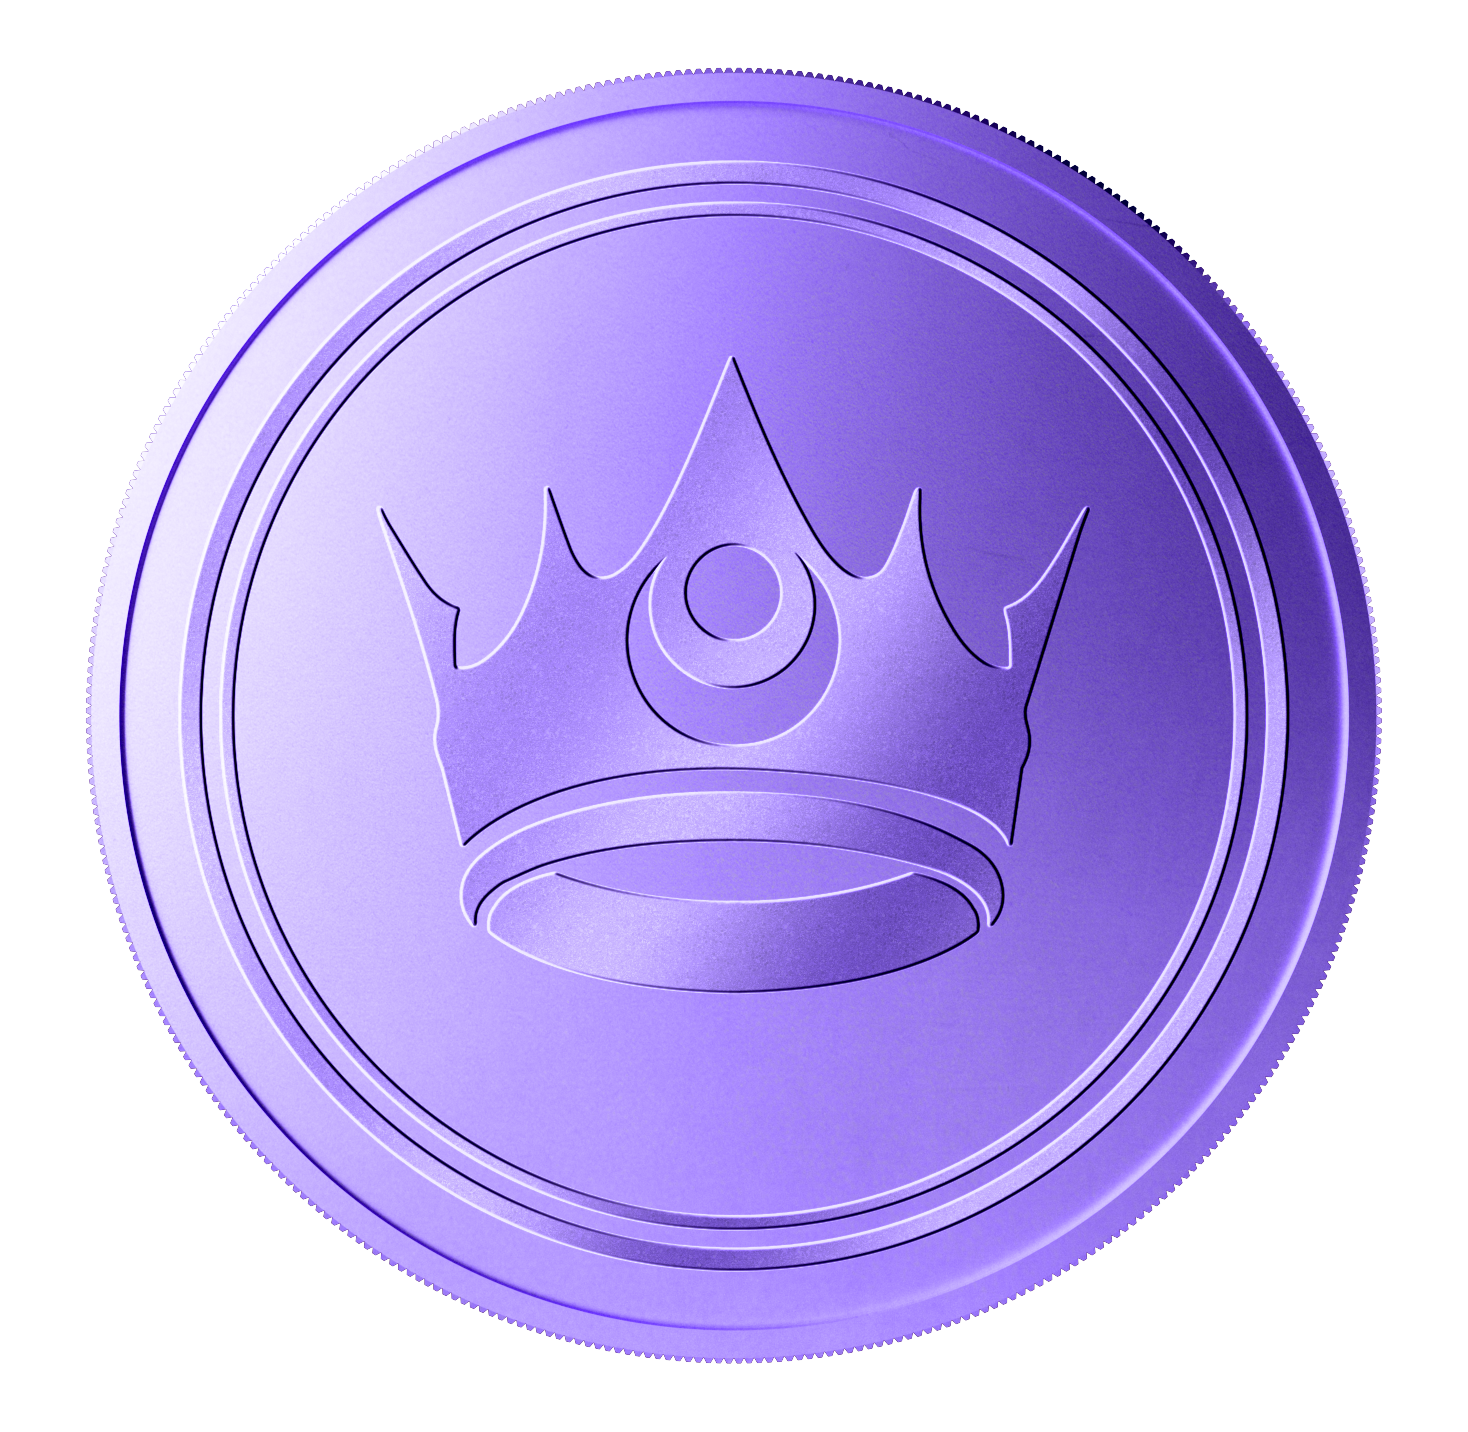 KING price now, Live KING price, marketcap, chart, and info | CoinCarp